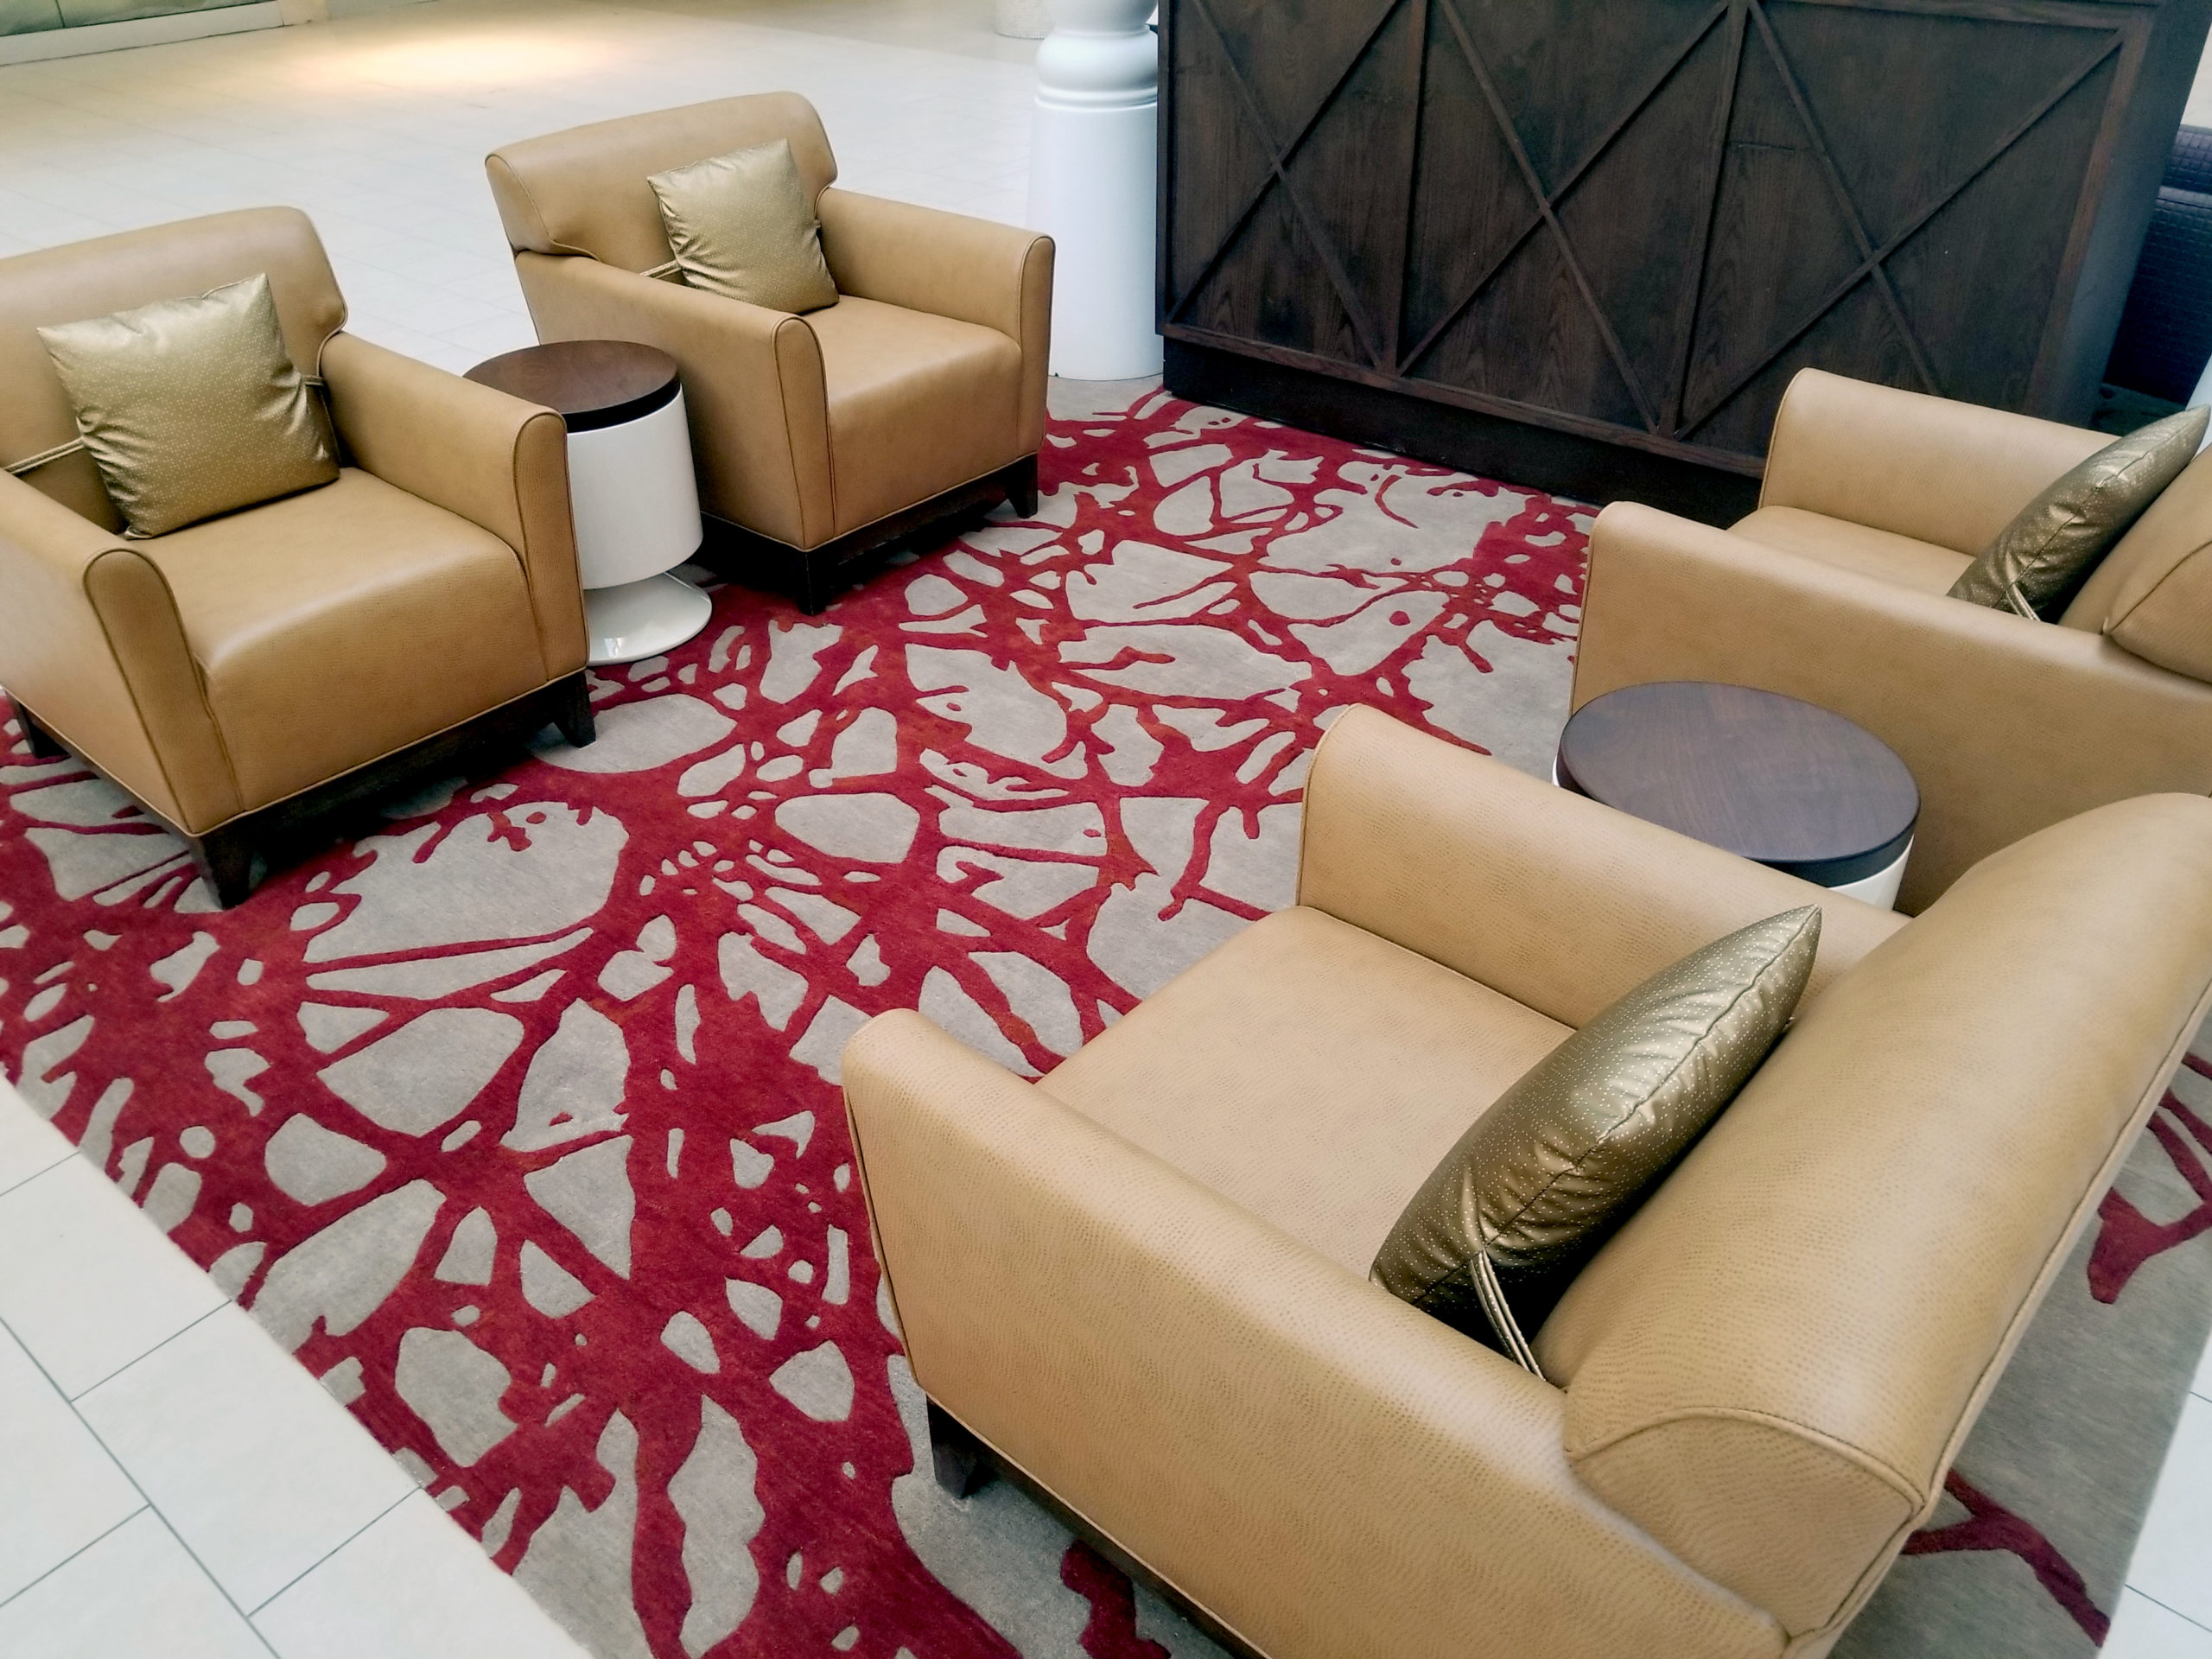 Visions luxury hand tufted rug